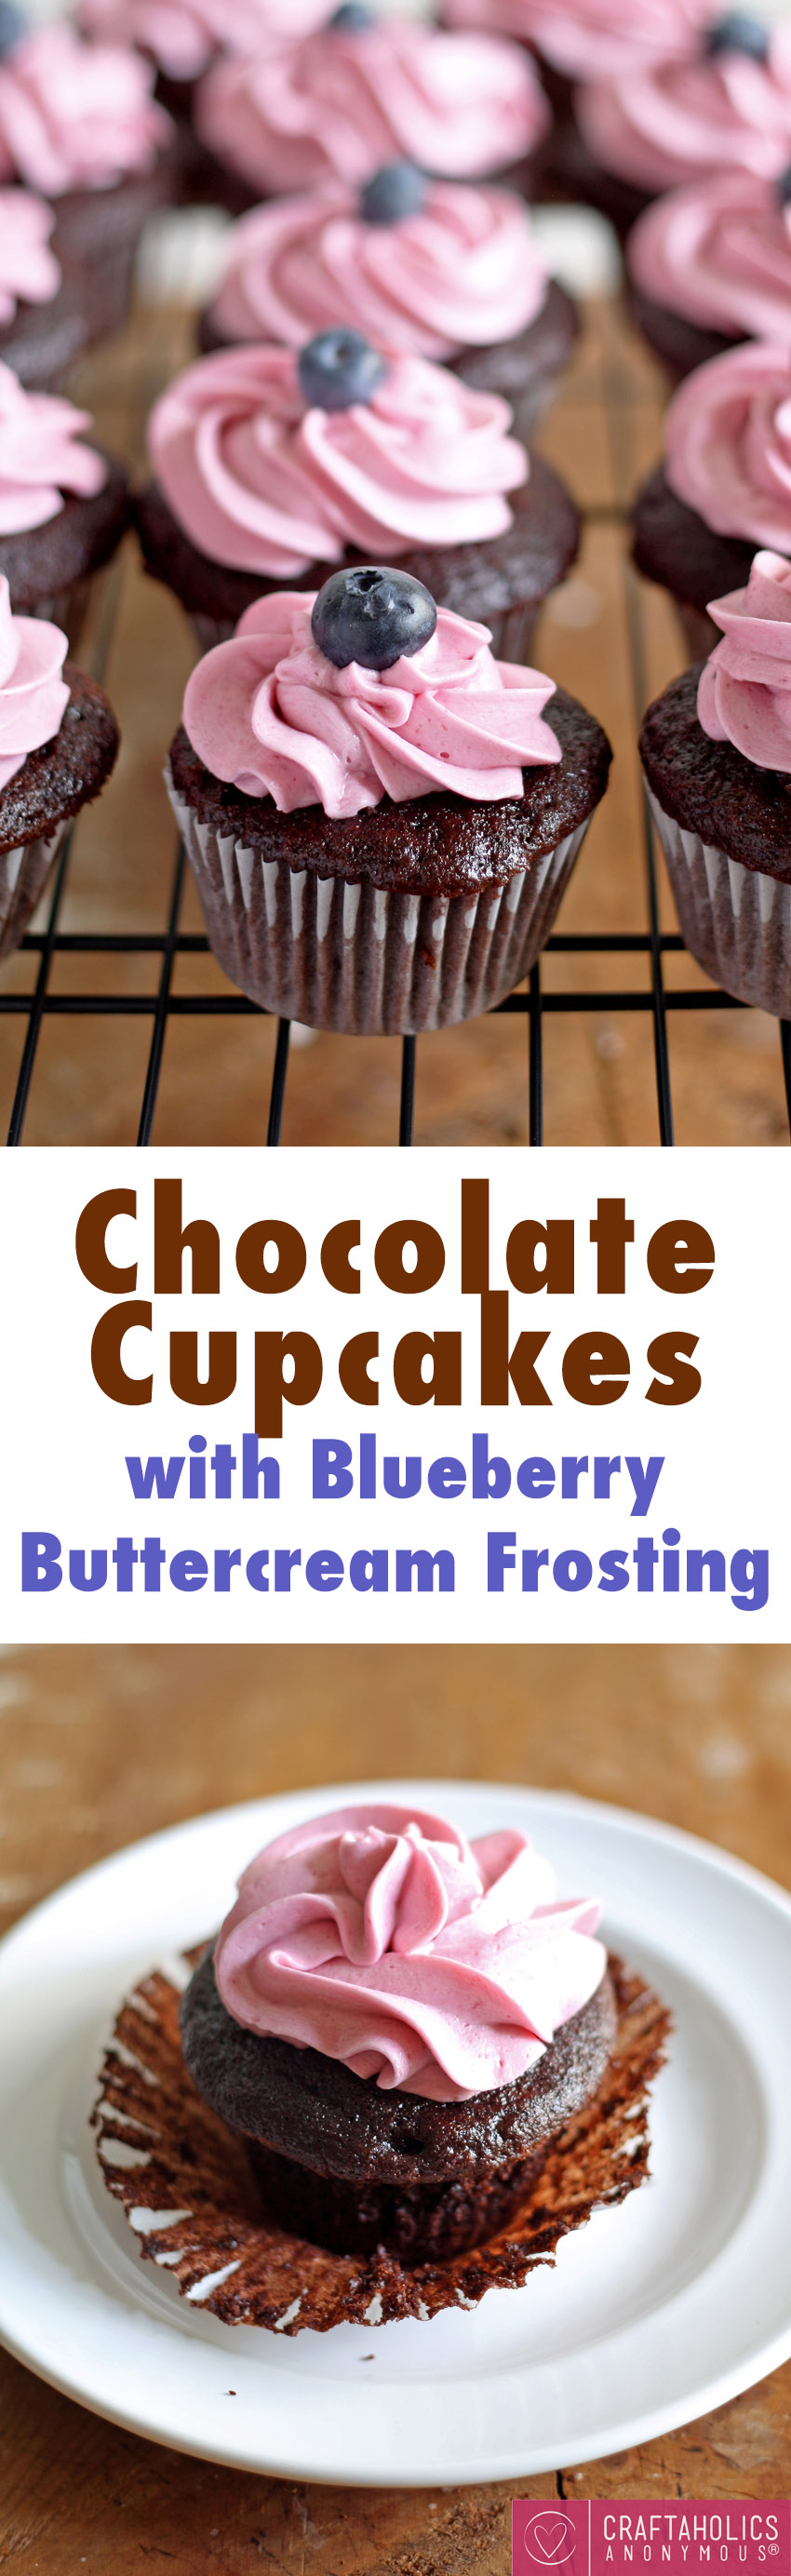 chocolate-cupcakes-with-blueberry-buttercream-frosting-pin